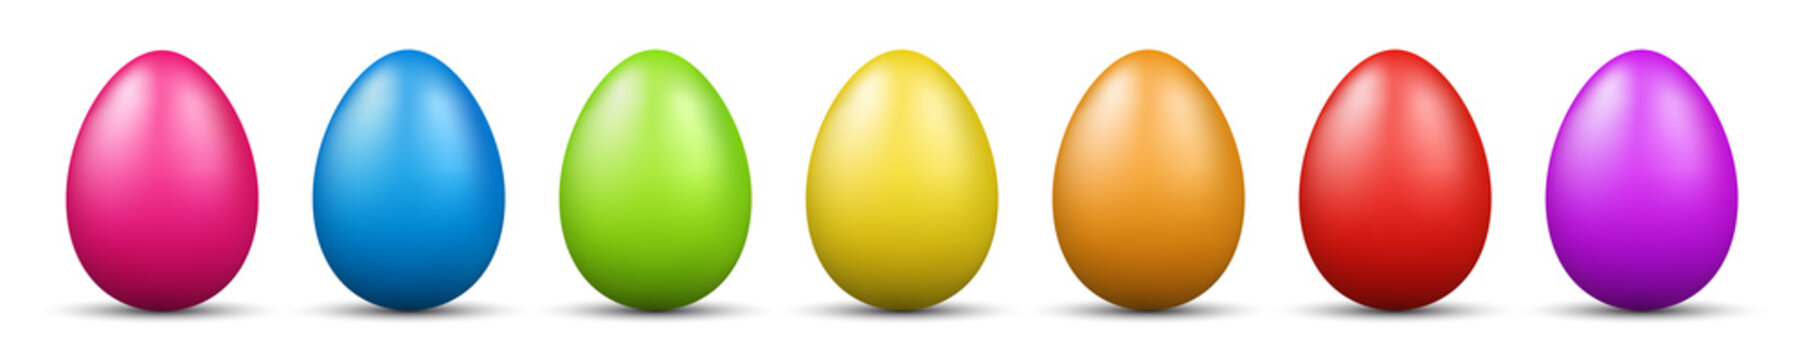 colorful easter eggs vector graphic